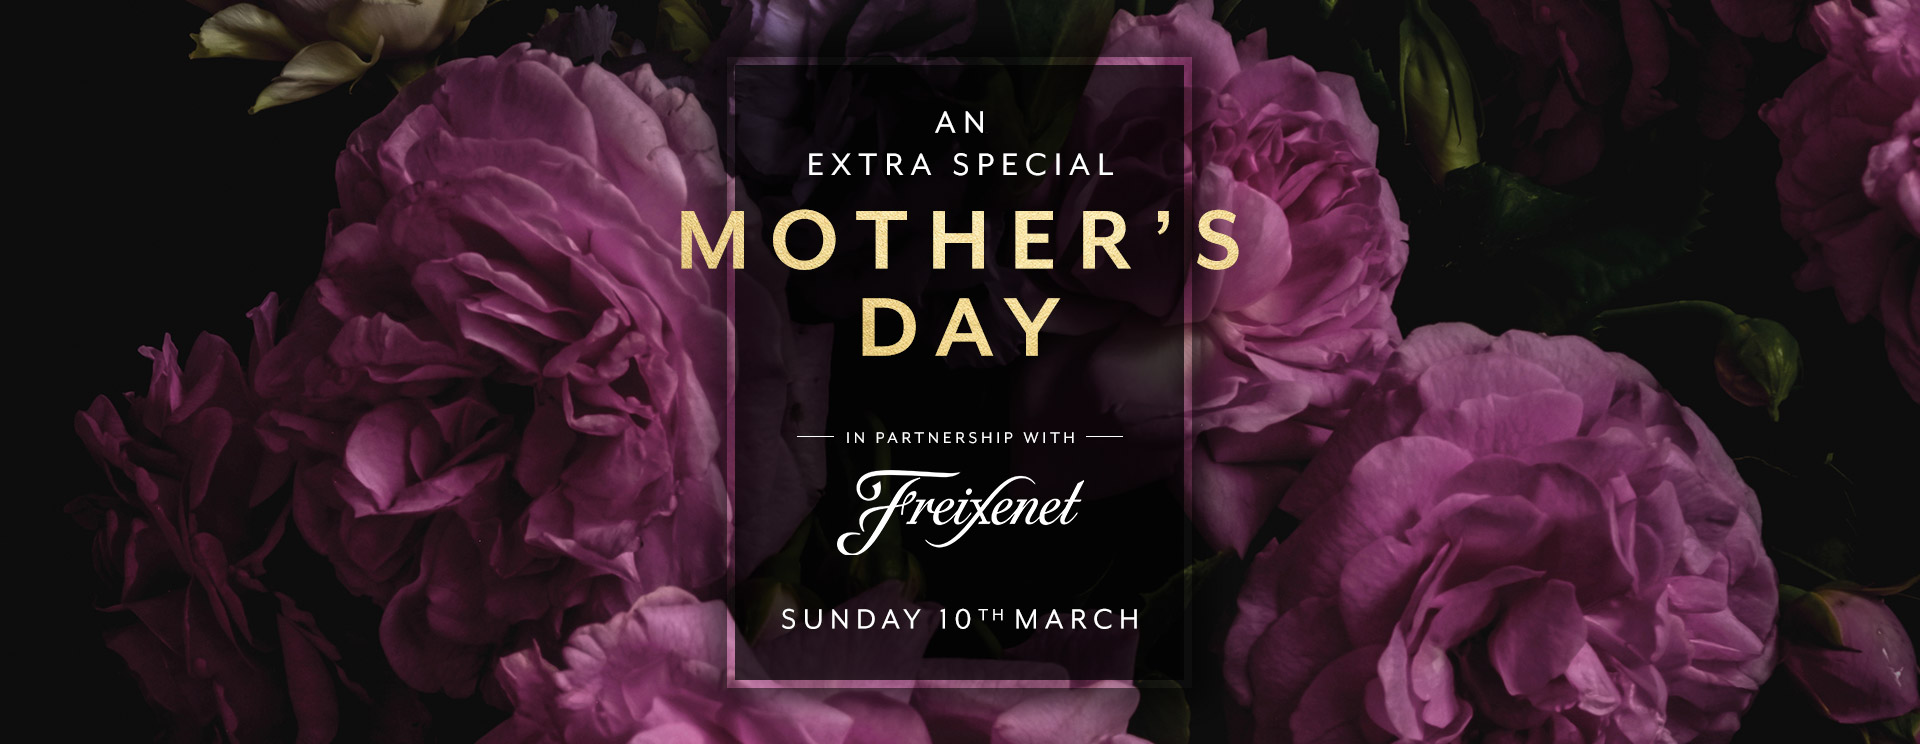 Mother’s Day menu/meal in Kenilworth